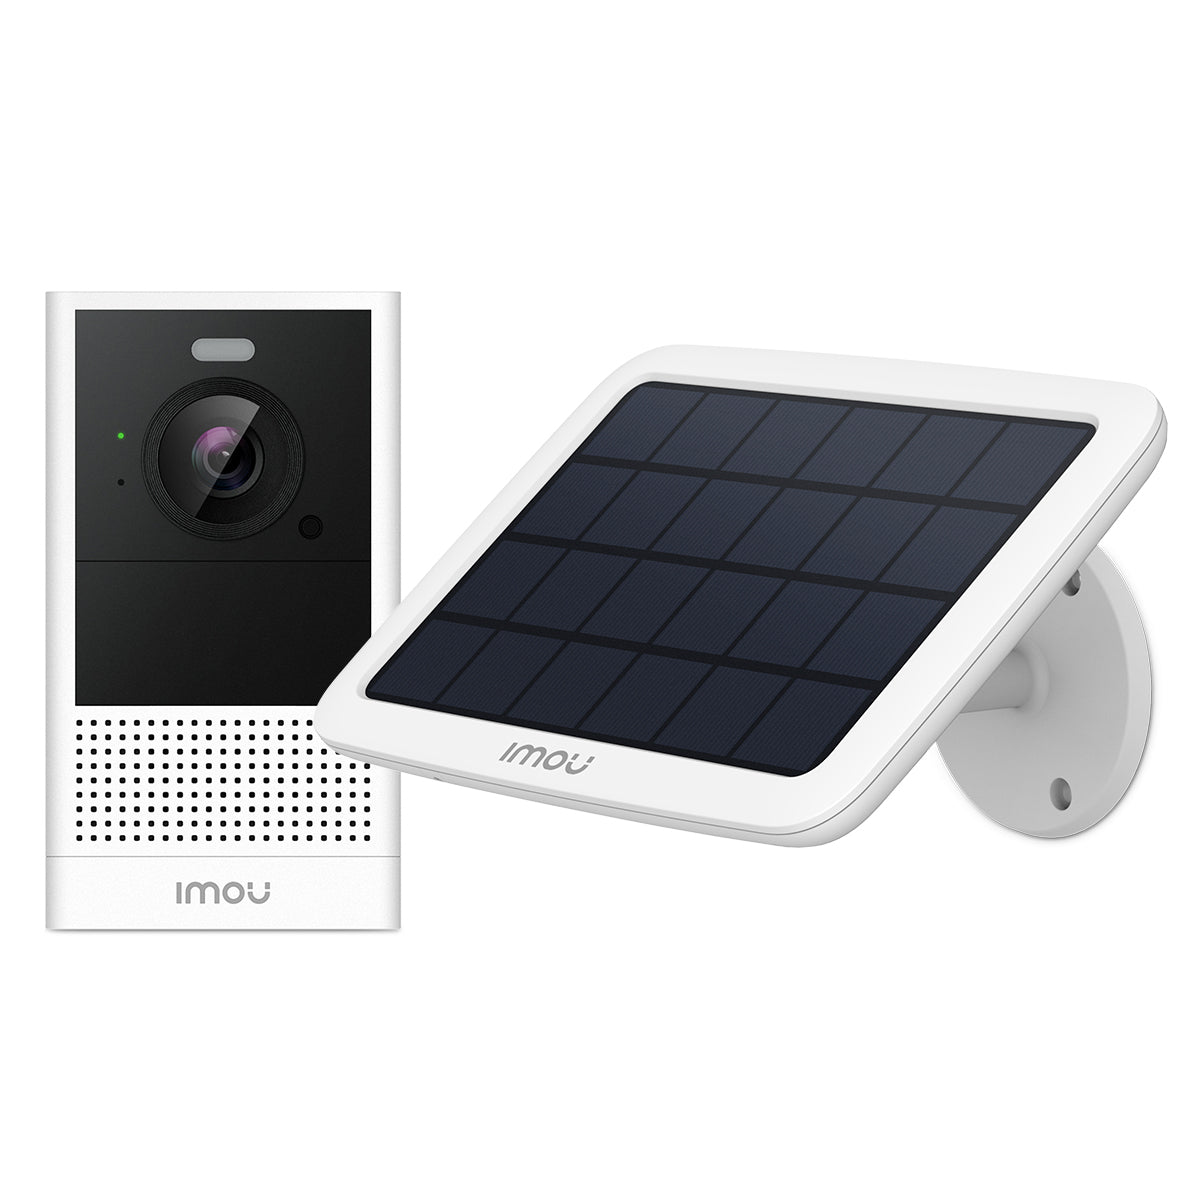 Imou Cell 2 4MP Battery Operated Wi-Fi Camera + Solar Panel Kit IPC-B46LP-White and FSP11 Cell 2 and Solar Panel Front View CC473-6 and PS470 